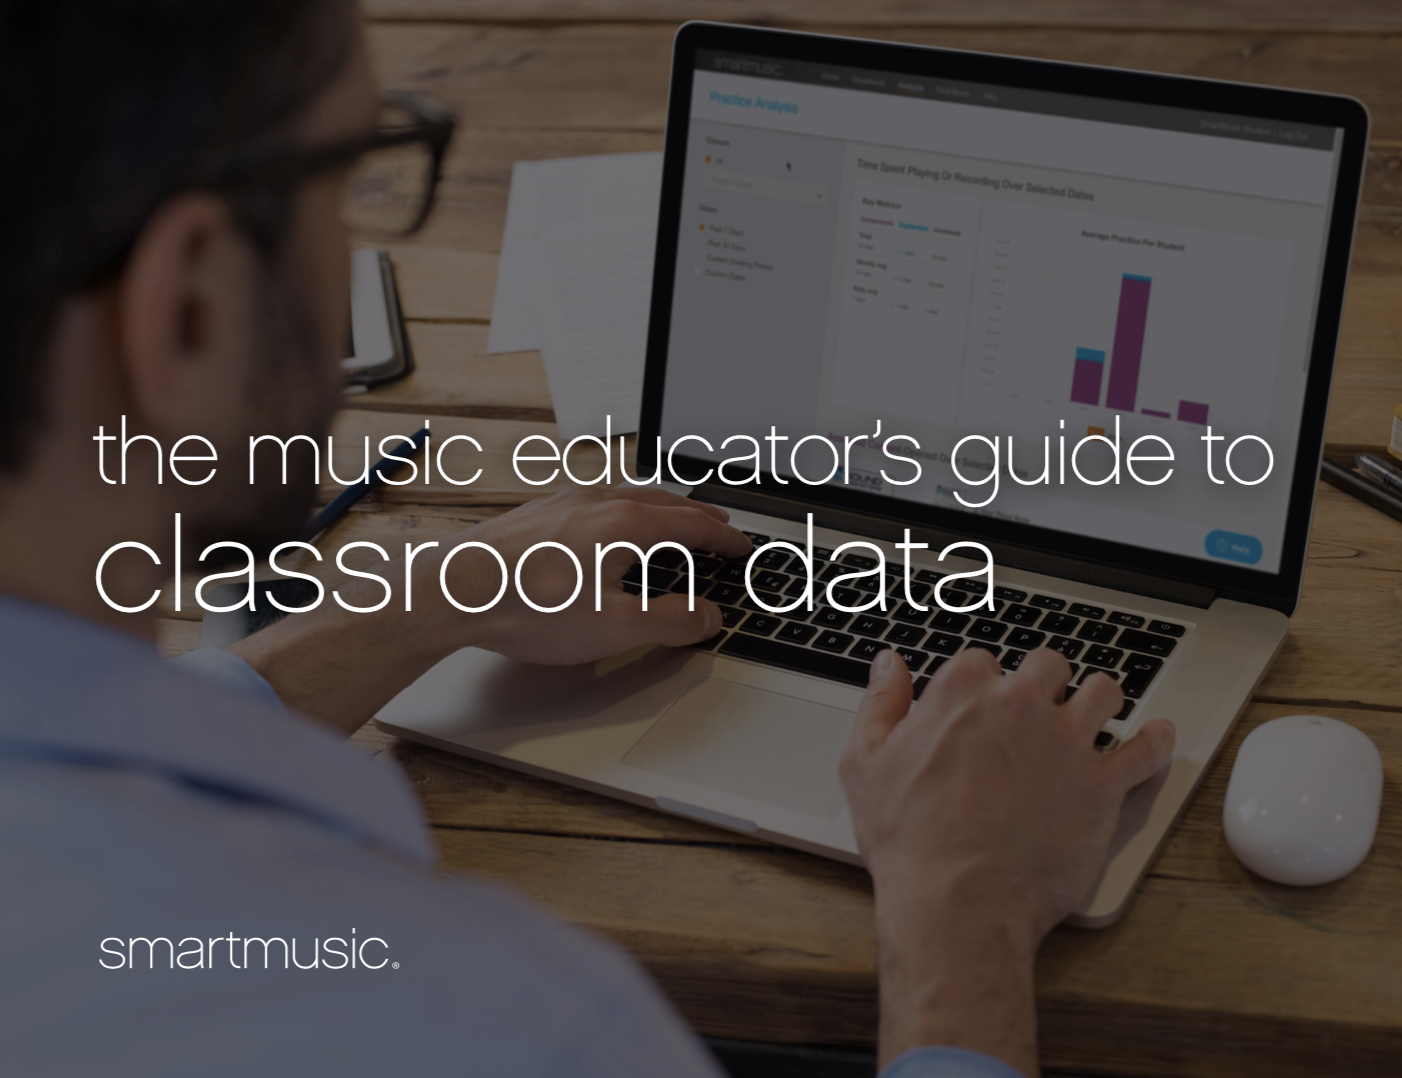 the music educator's guide to classroom data